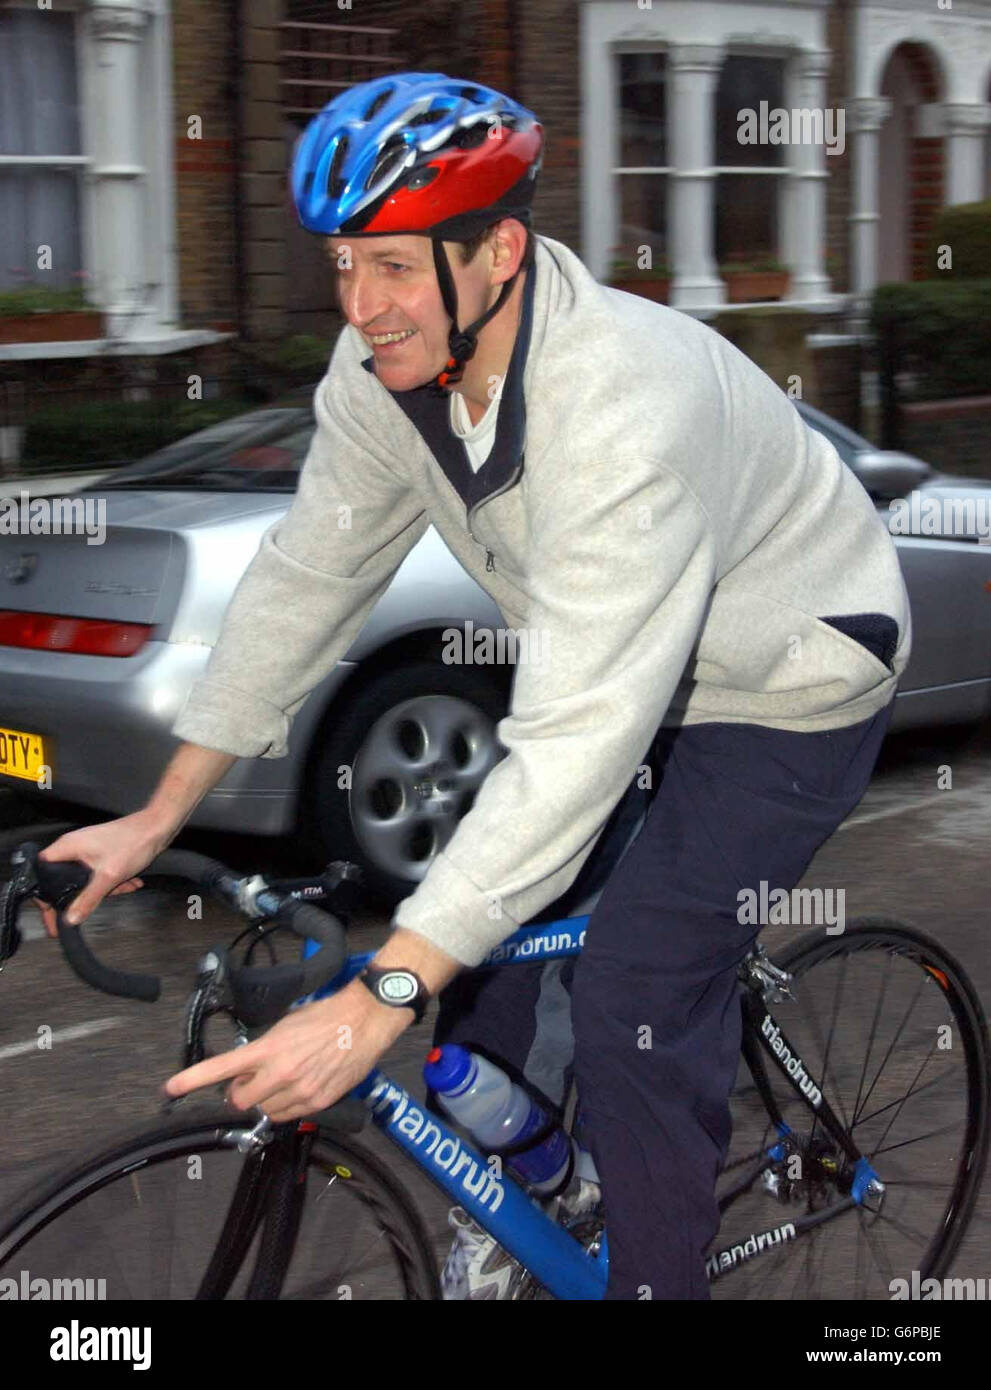 Alastair Campbell, the former Director of Communications to British Prime Minister Tony Blair, arrives at his home in north London, after a bicycle ride. The report by Lord Hutton into events surrounding the death of weapons expert Dr David Kelly will be released to the Government and other parties involved later Tuesday ahead of its formal publication. Stock Photo